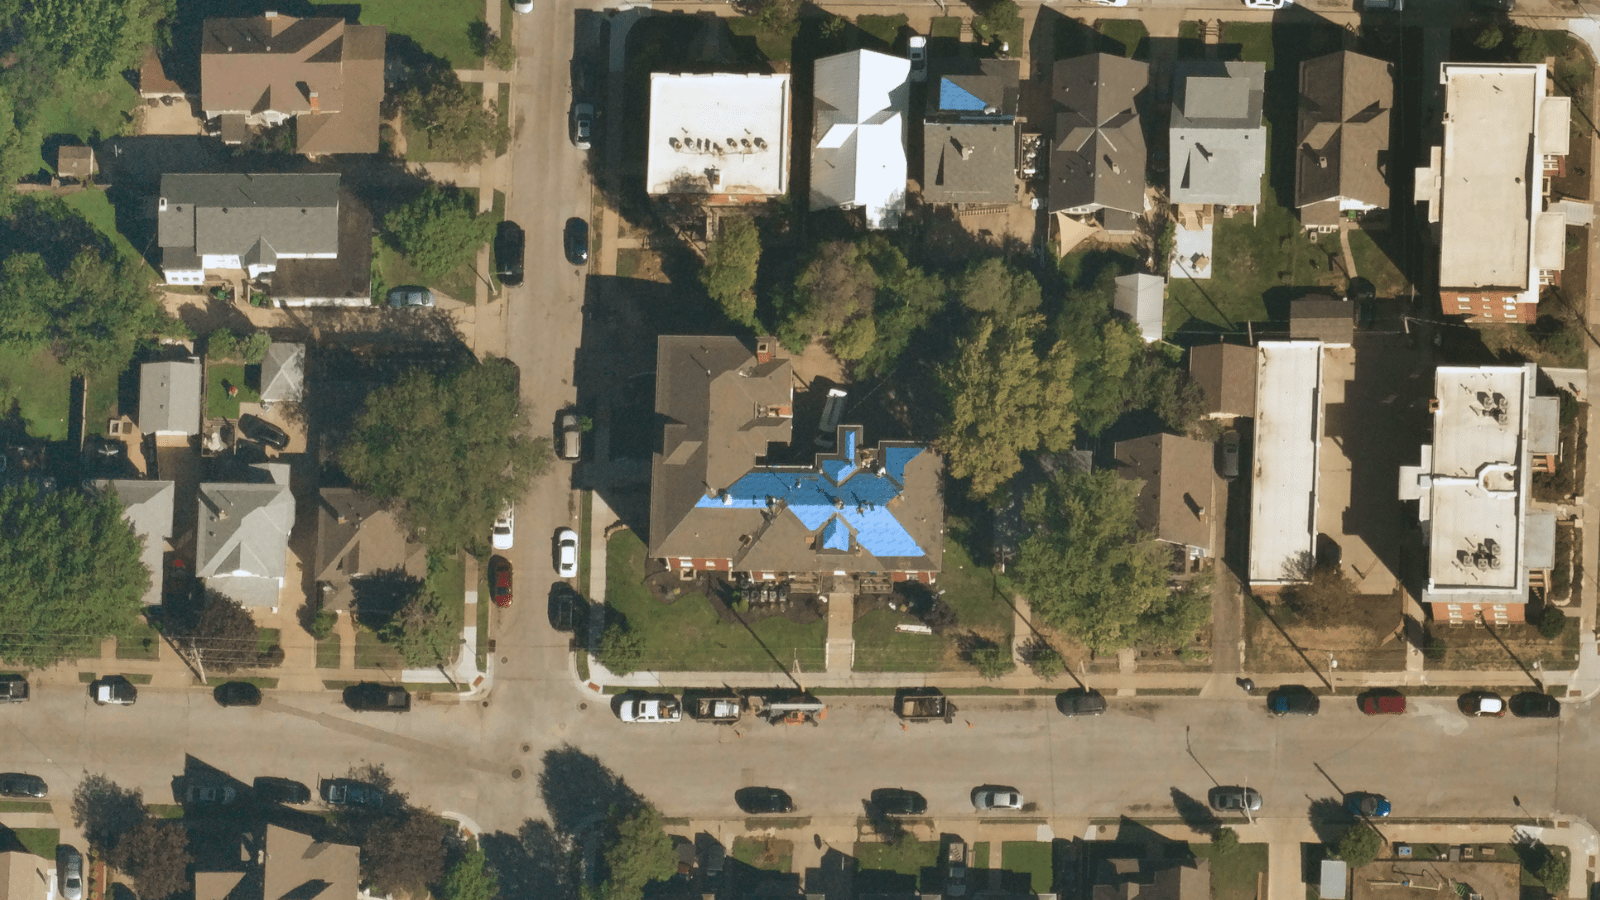 Near Space Labs' 10 cm capture of property that shows blue tarp on roof indication roof damage.